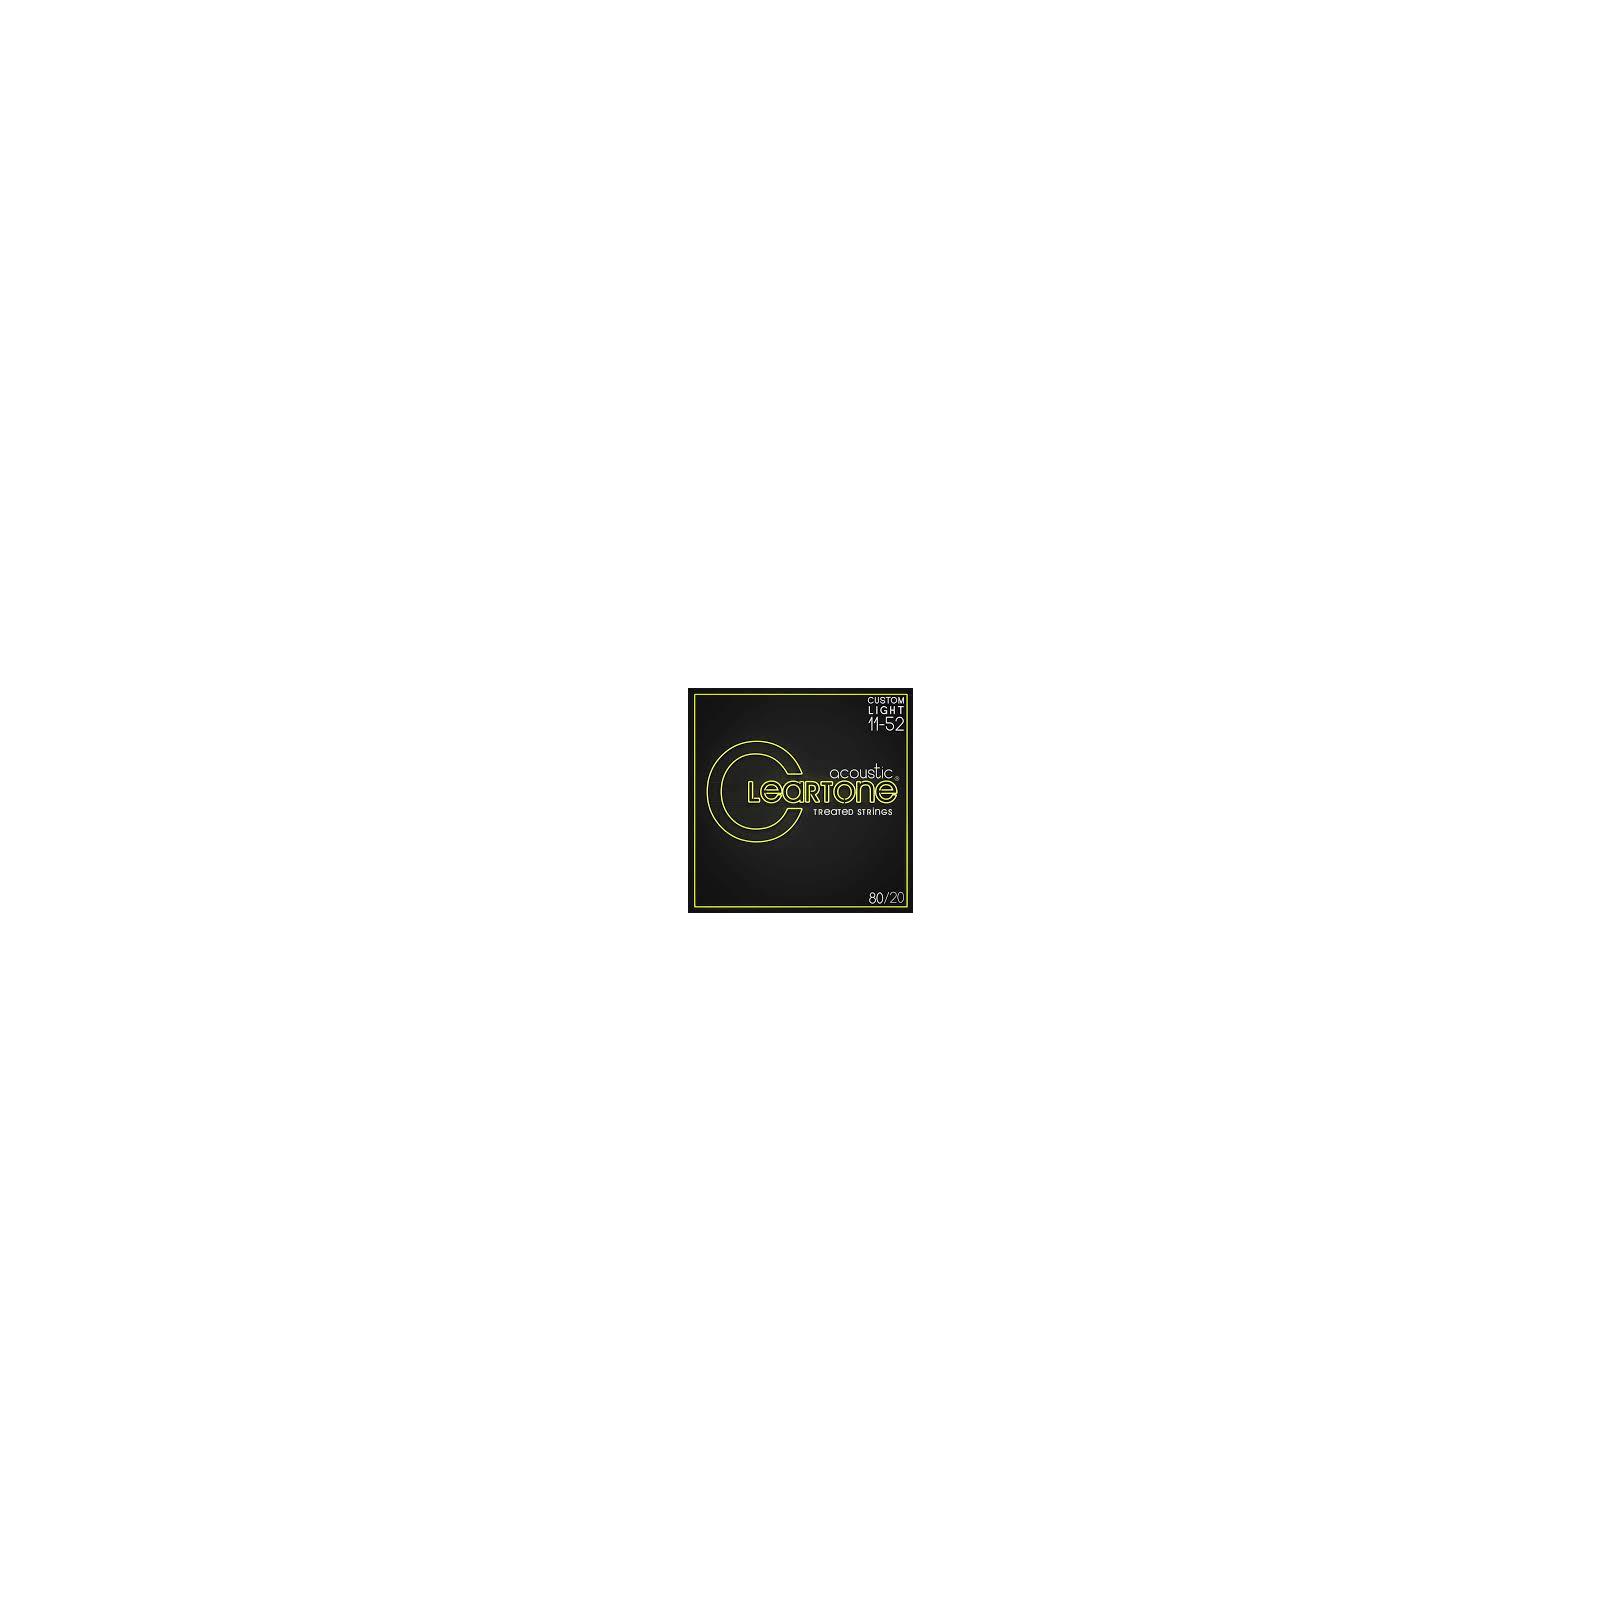 Cleartone CLEARTONE GUITAR STRING 11-52